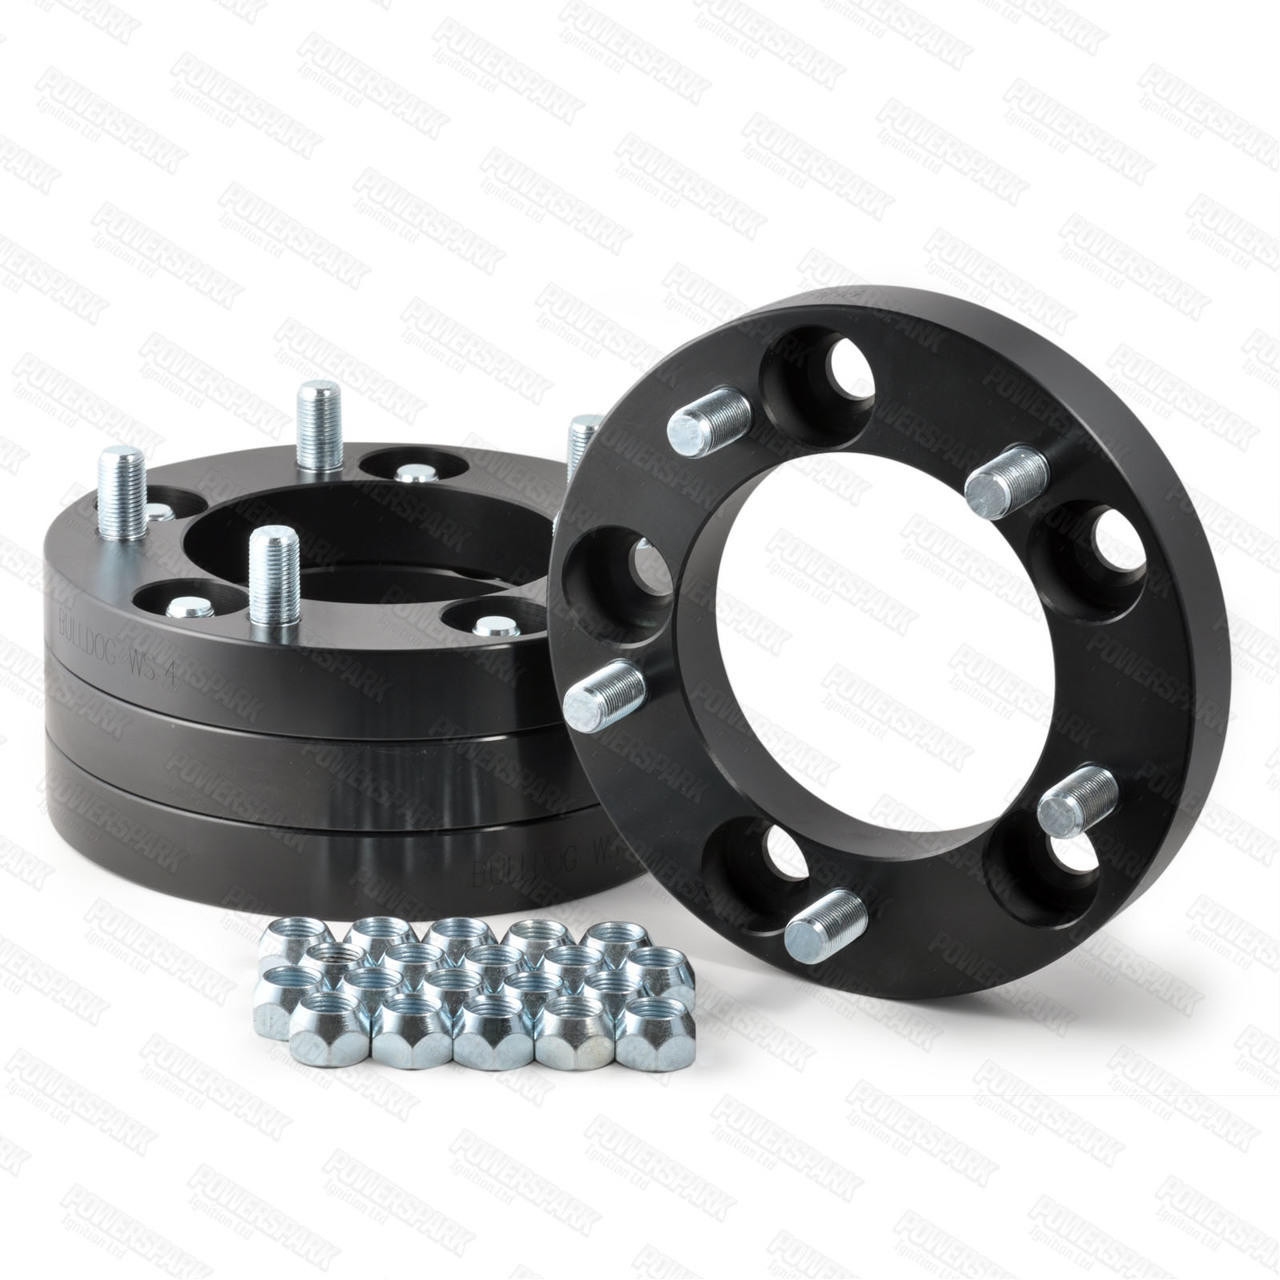 Bulldog Set of 4 Bulldog 30mm Wheel Spacers to fit Land Rover Defender, Discovery 1 and RRC Non Hub Centric